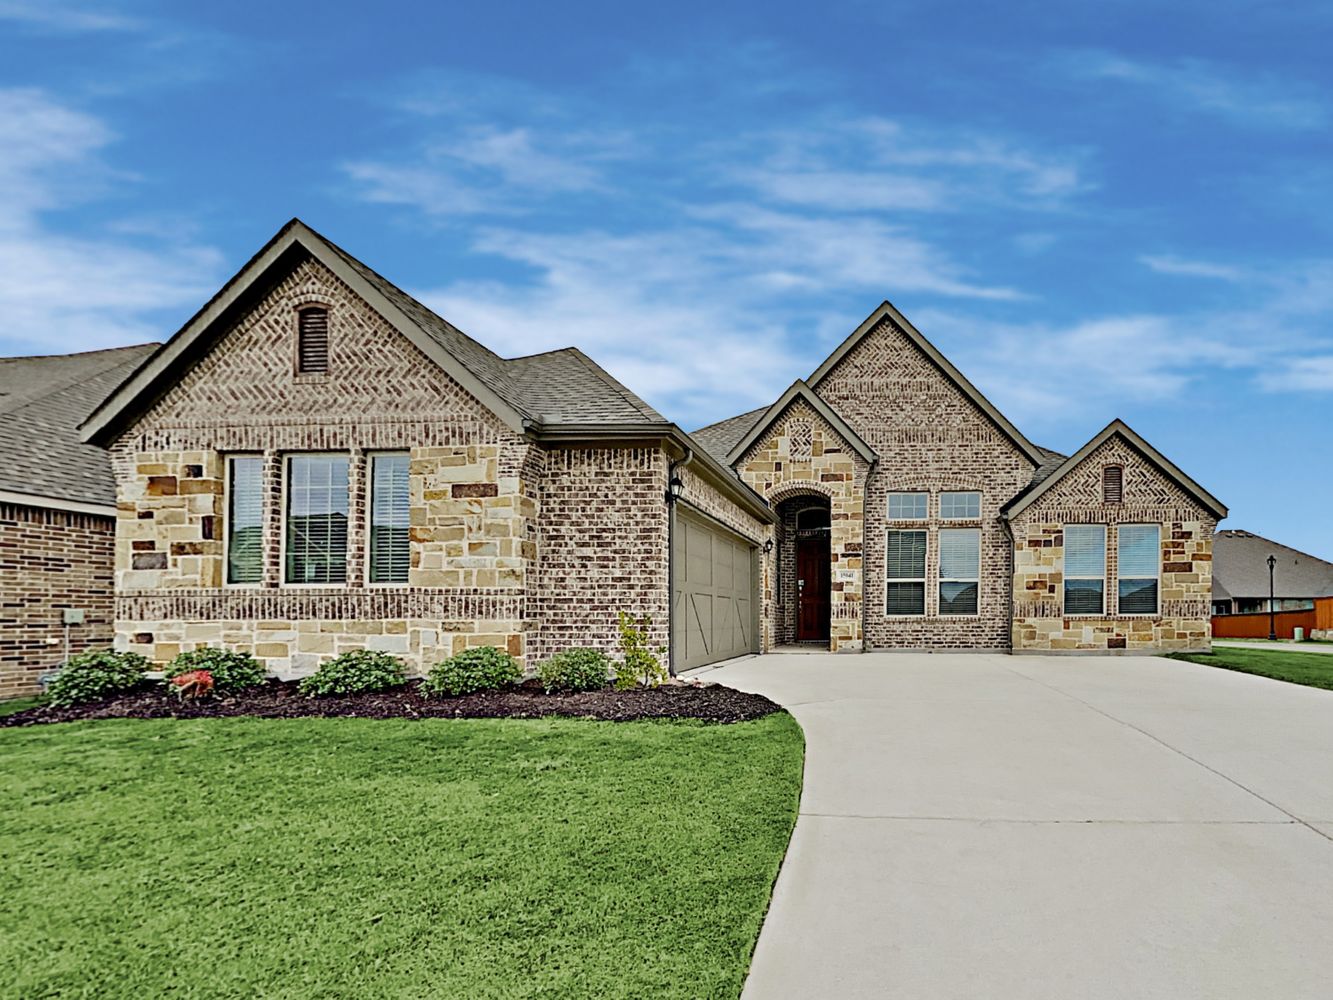 Beautiful home with two-car garage and covered porch at Invitation Homes Dallas.